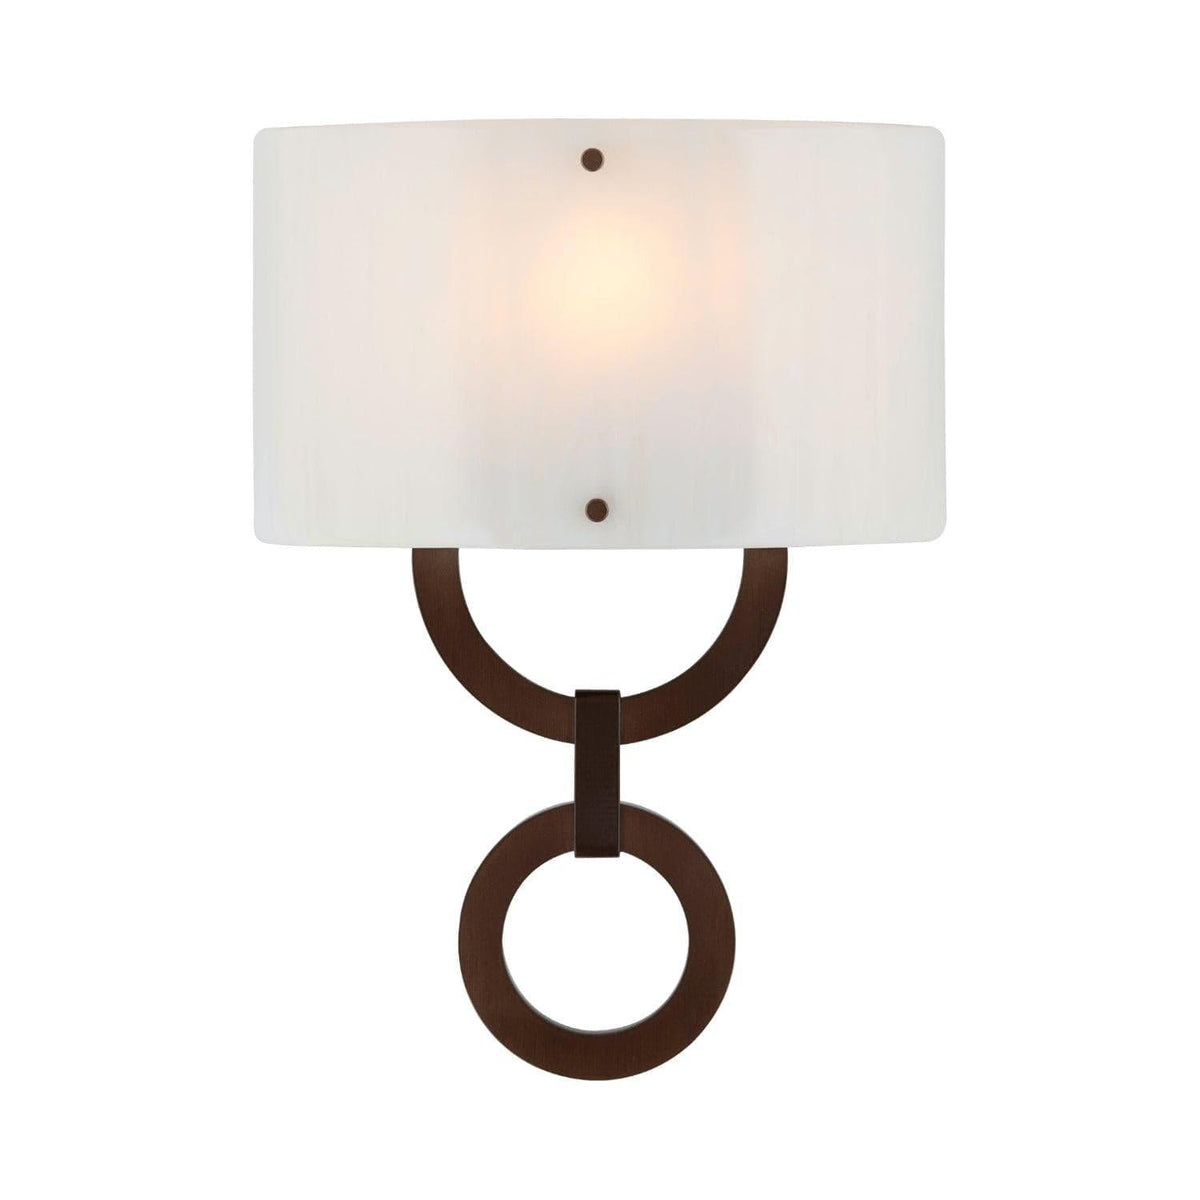 Hammerton Studio - Carlyle Round Link Cover Sconce - CSB0033-0D-RB-IW-E2 | Montreal Lighting & Hardware